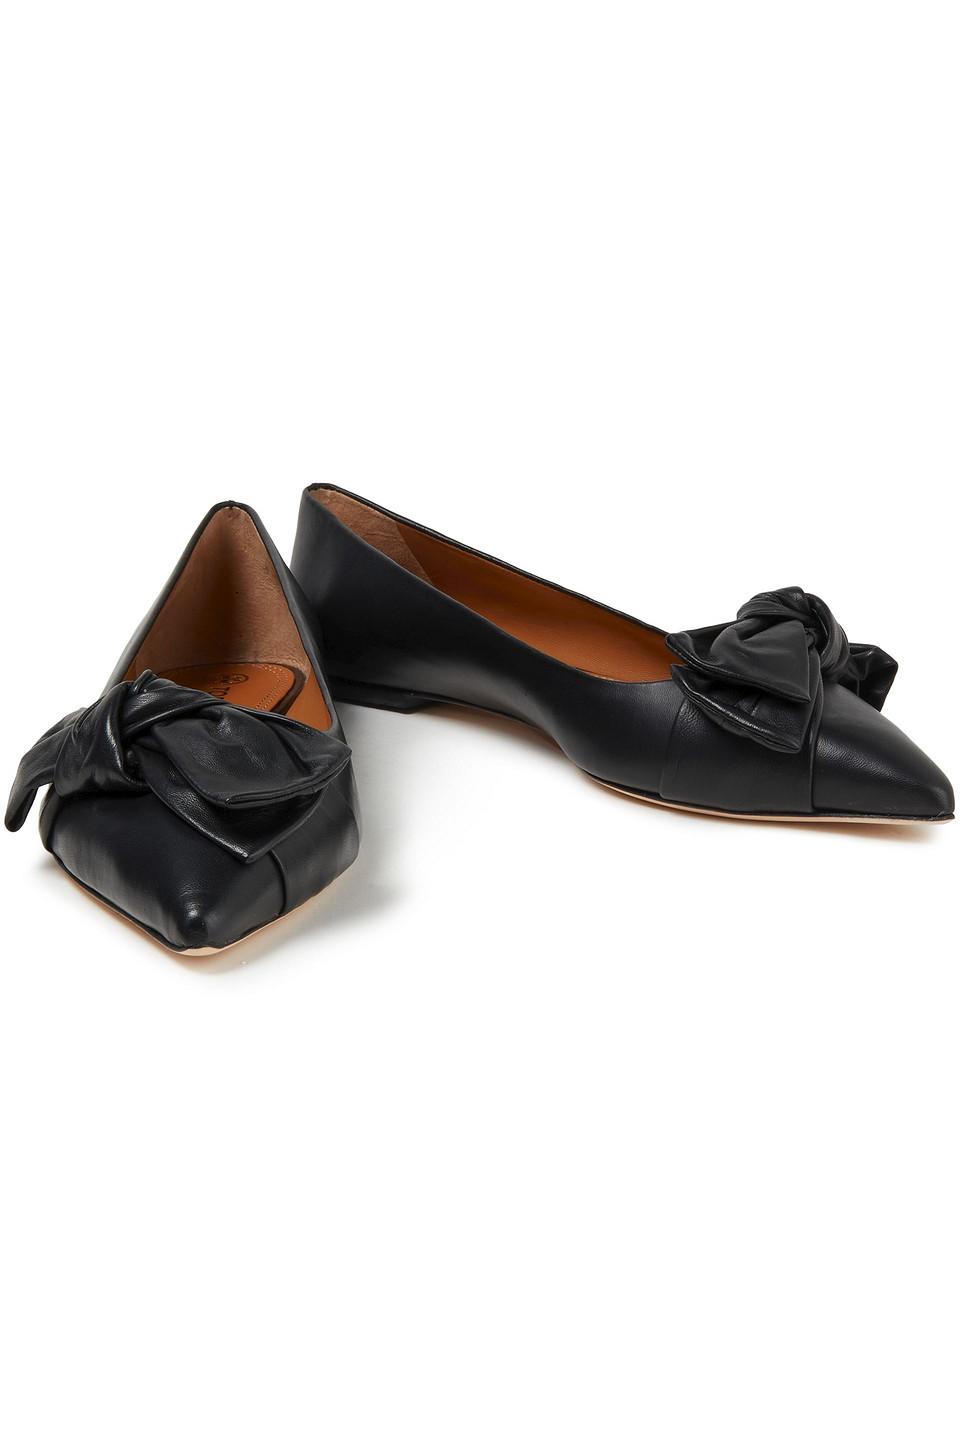 Tory Burch Bow-embellished Leather Point-toe Flats in Black | Lyst UK